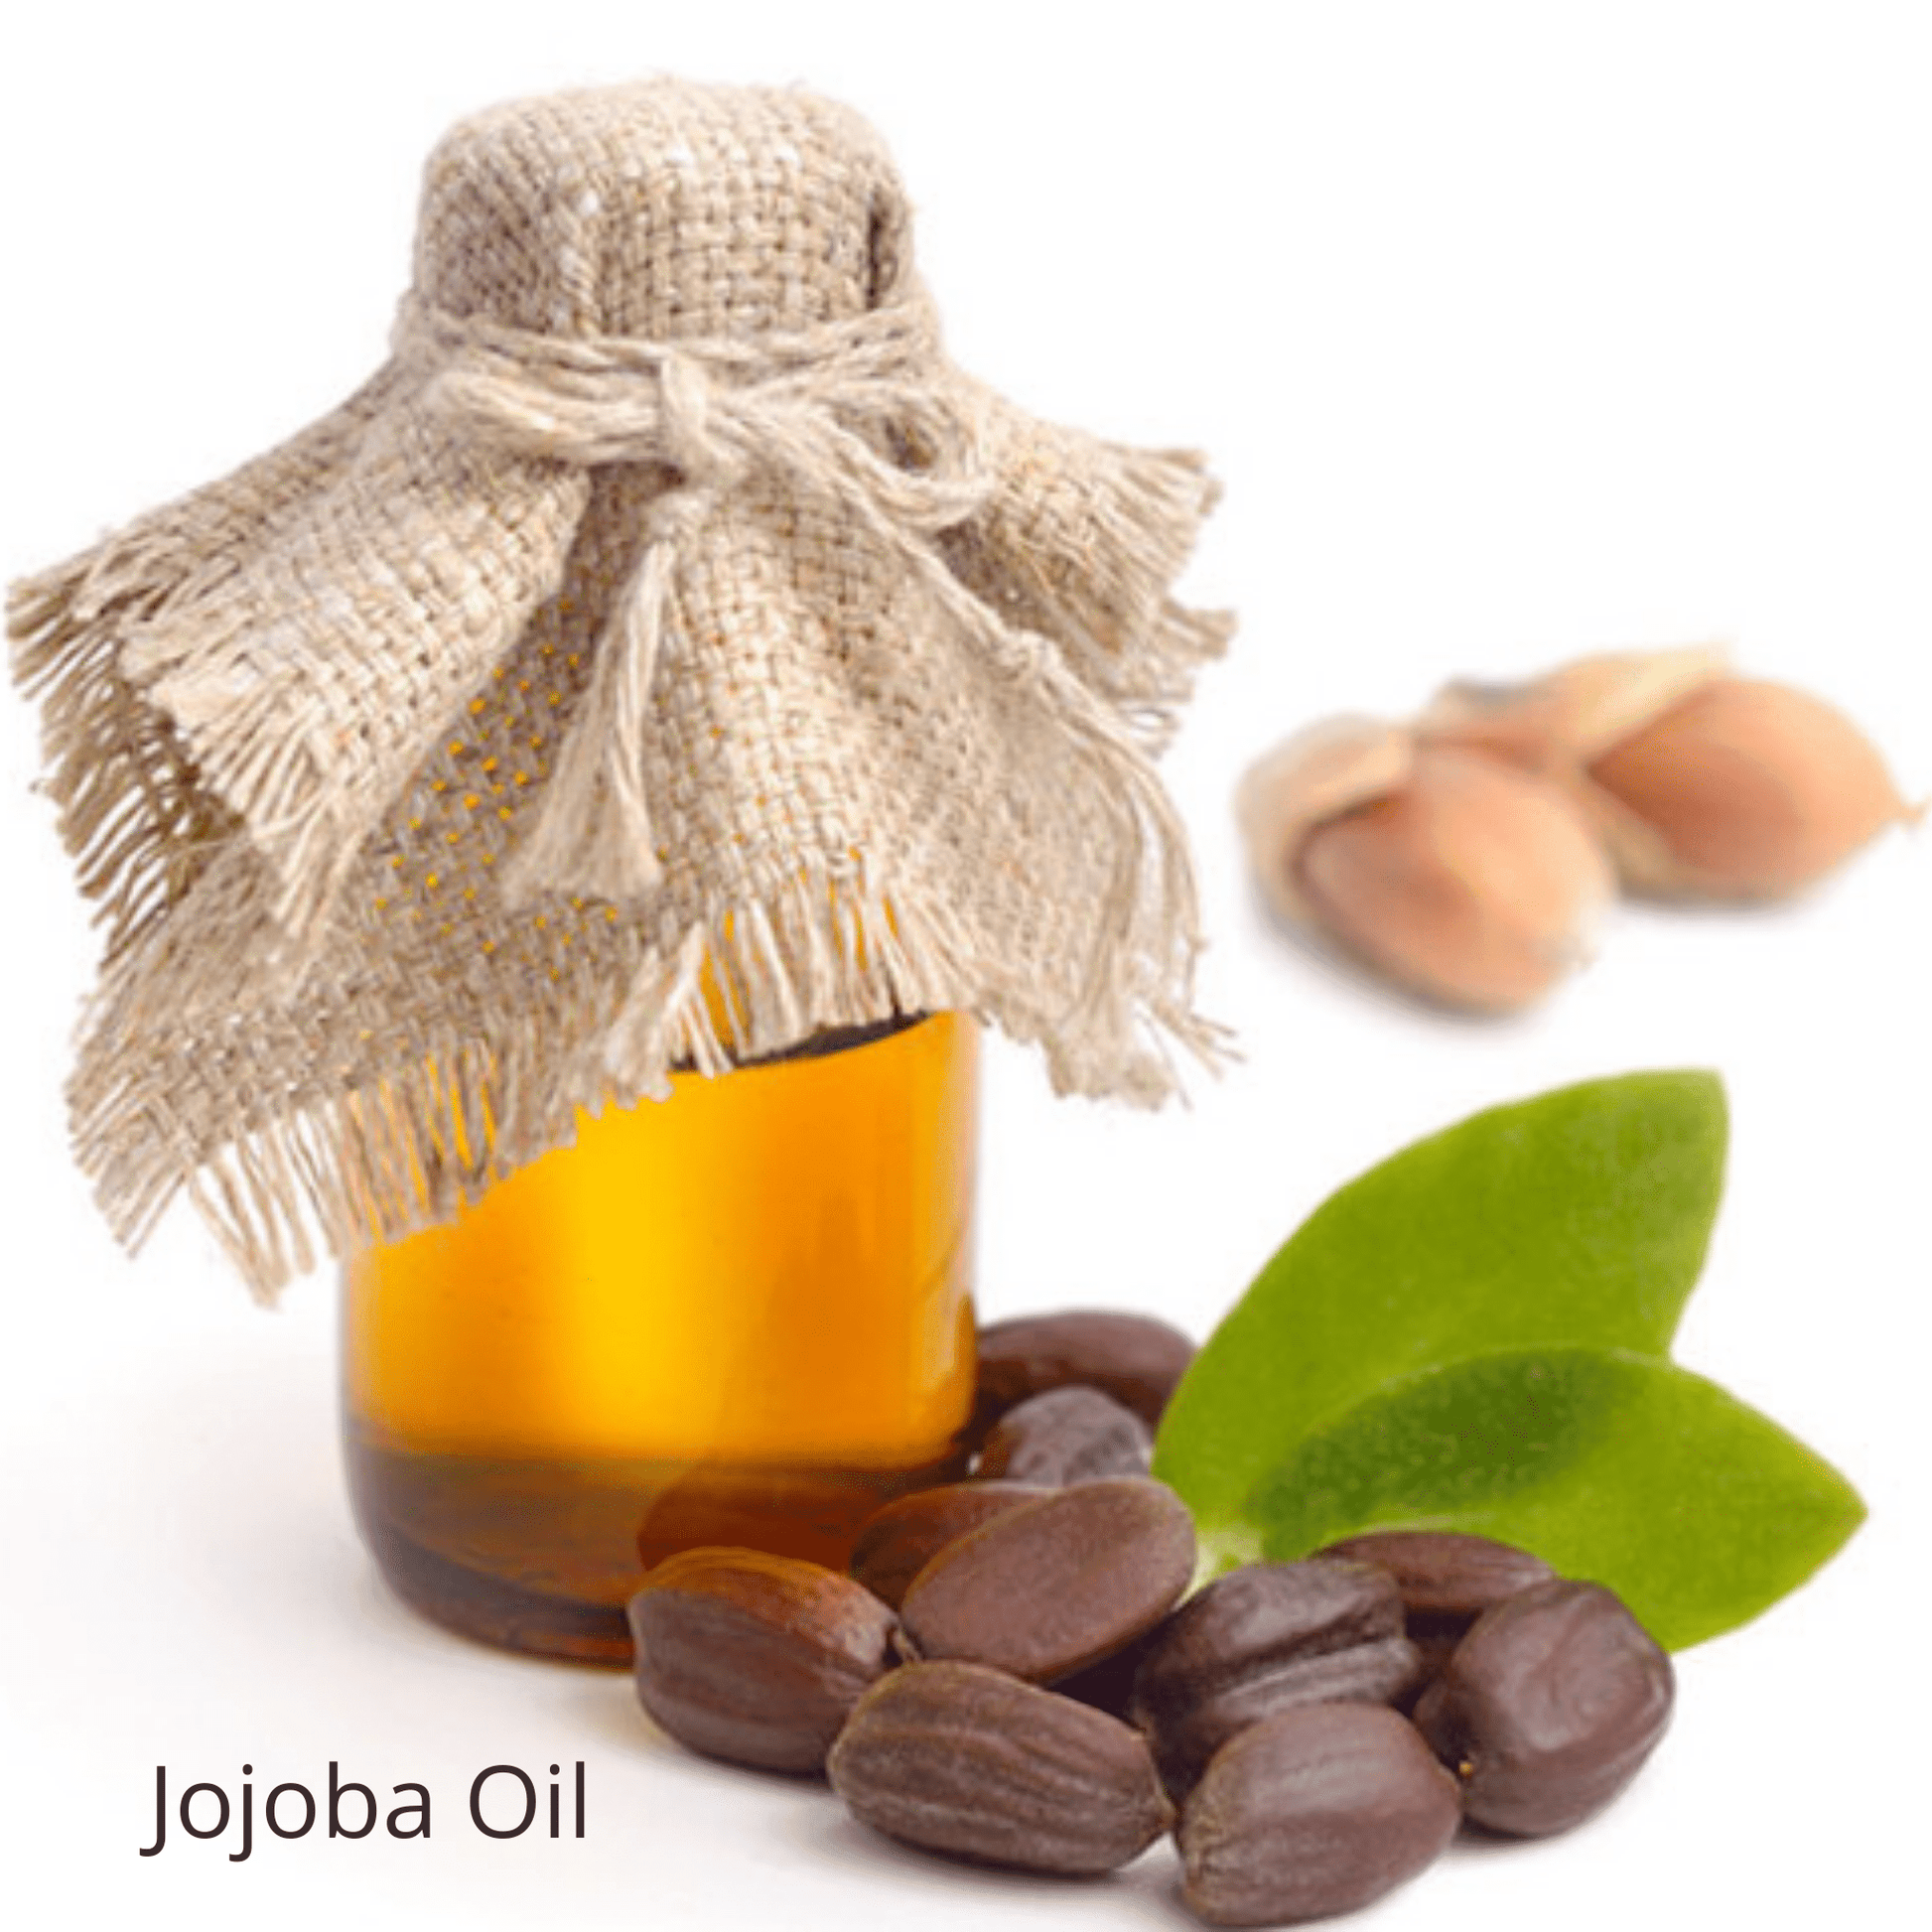 Be Green Bath and Body Herbal Miracle Balm contains jojoba oil